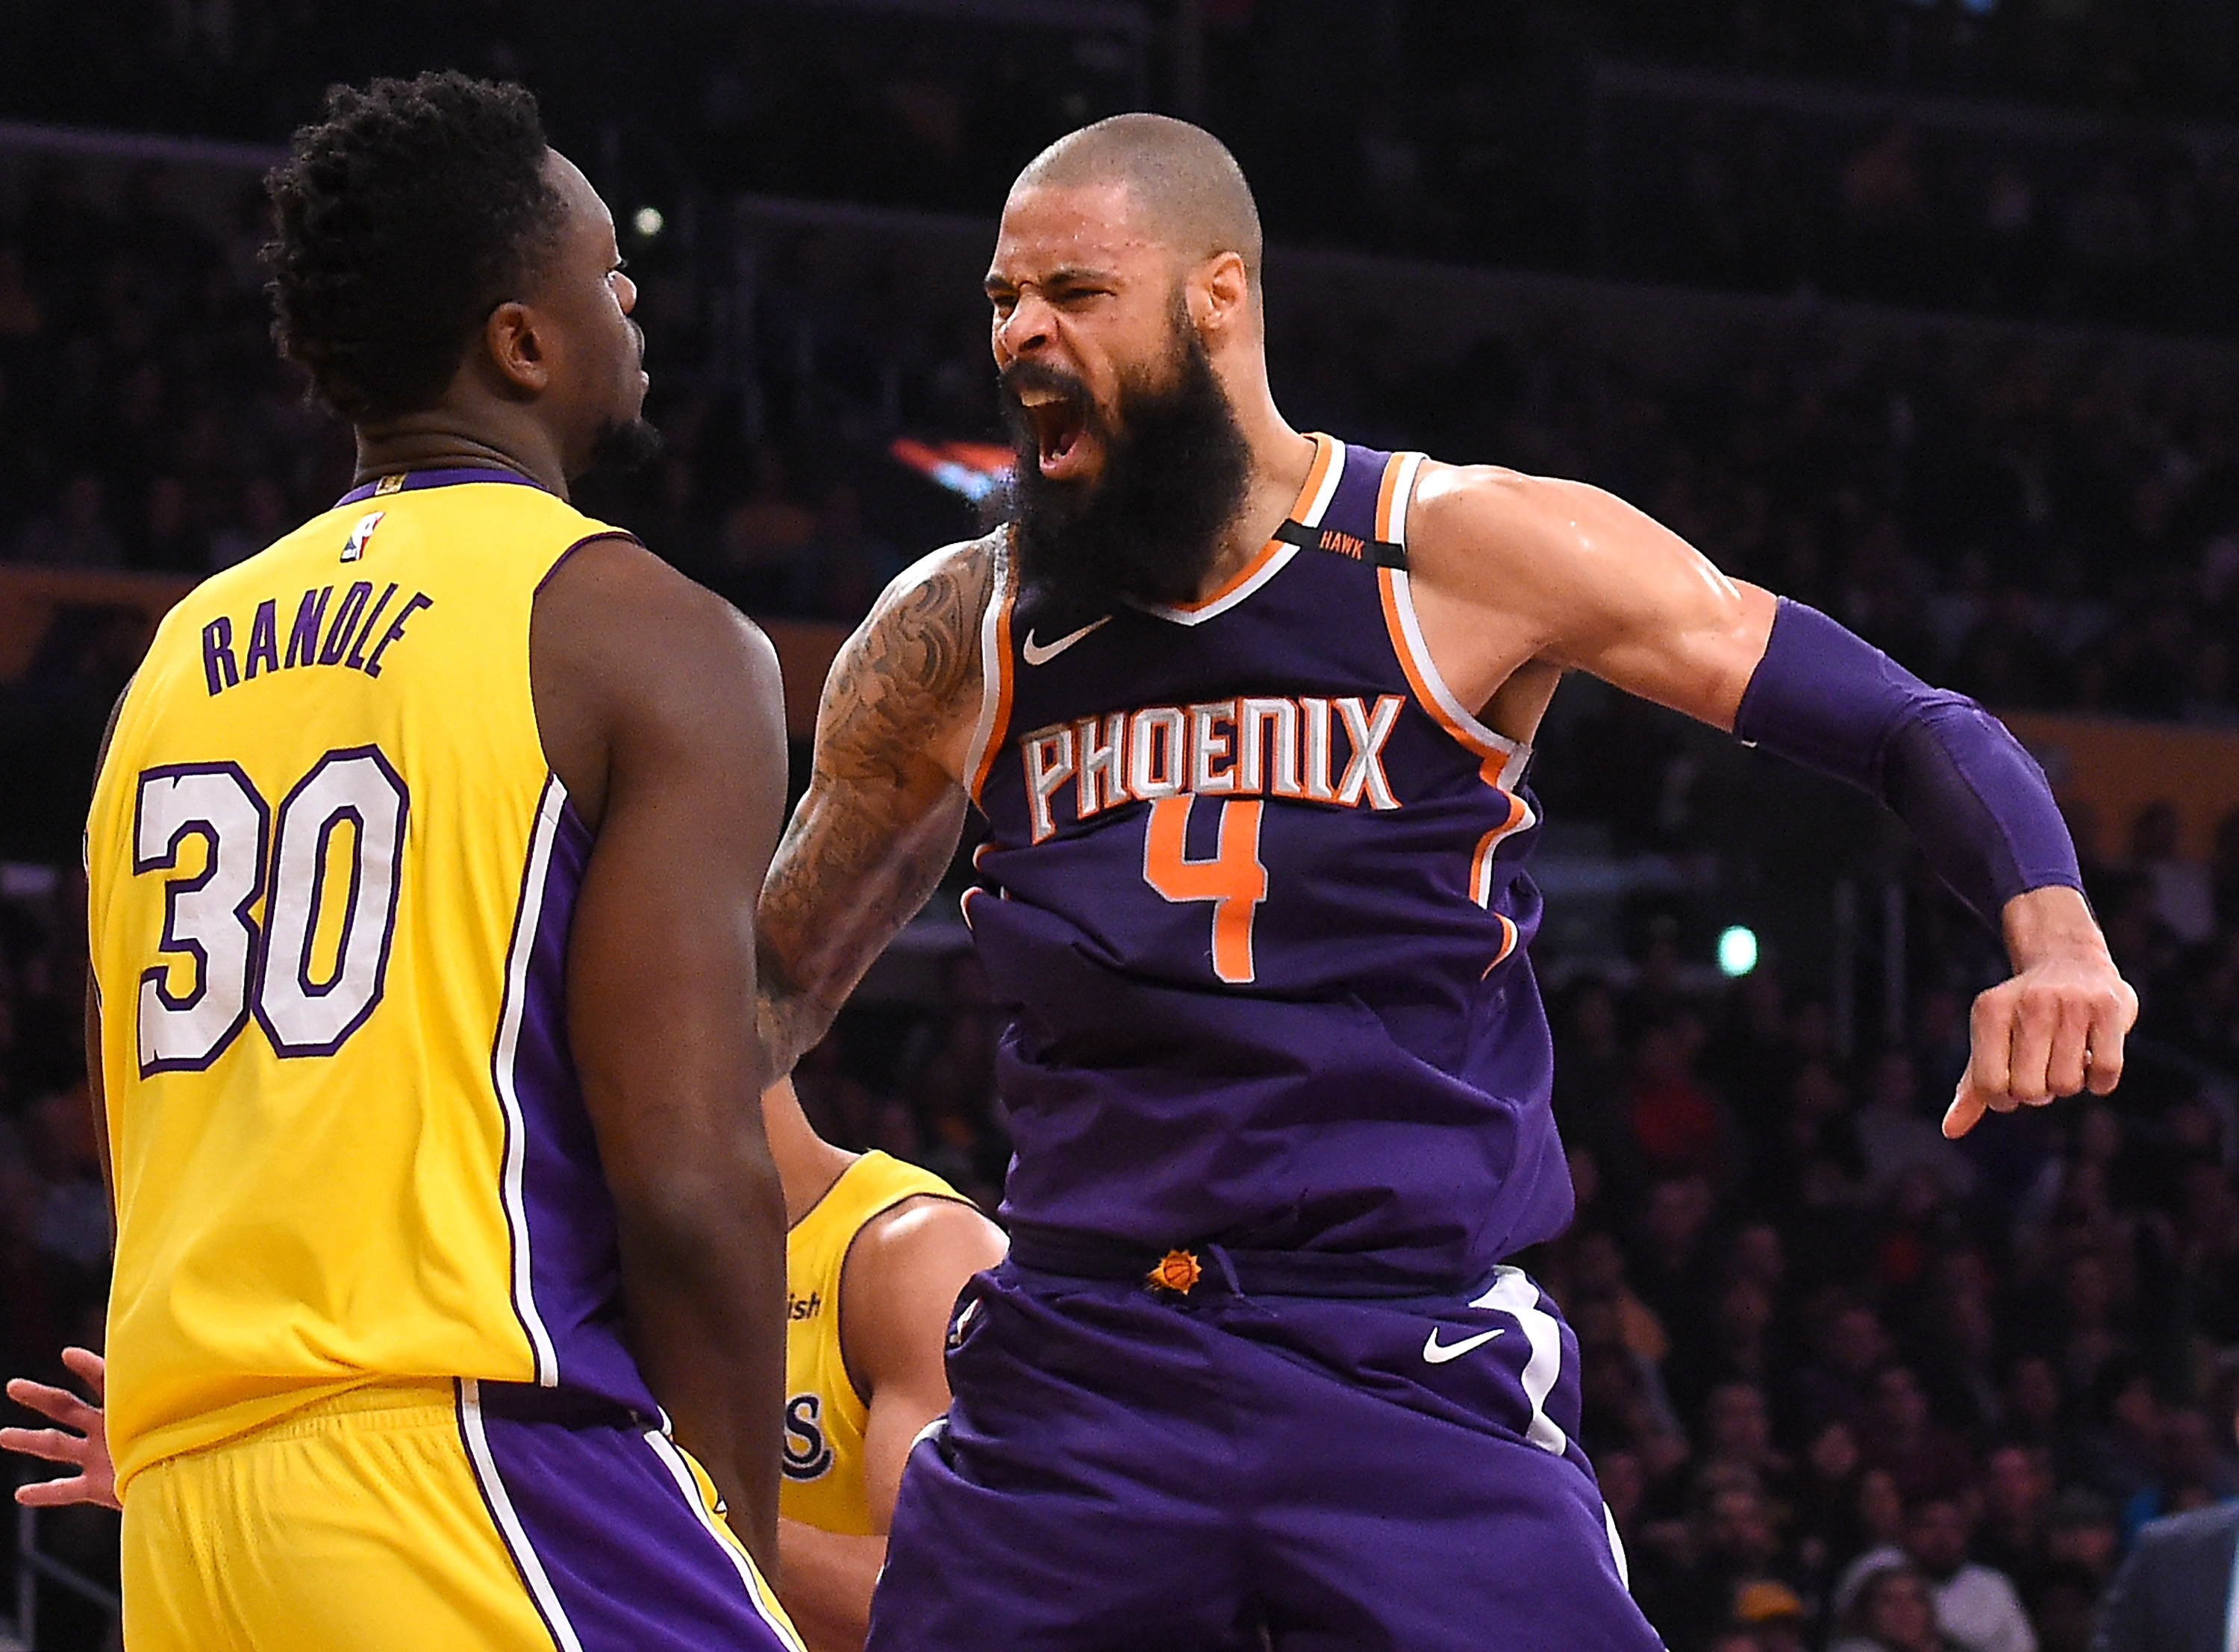 Tyson Chandler: Compton's Most Wanted